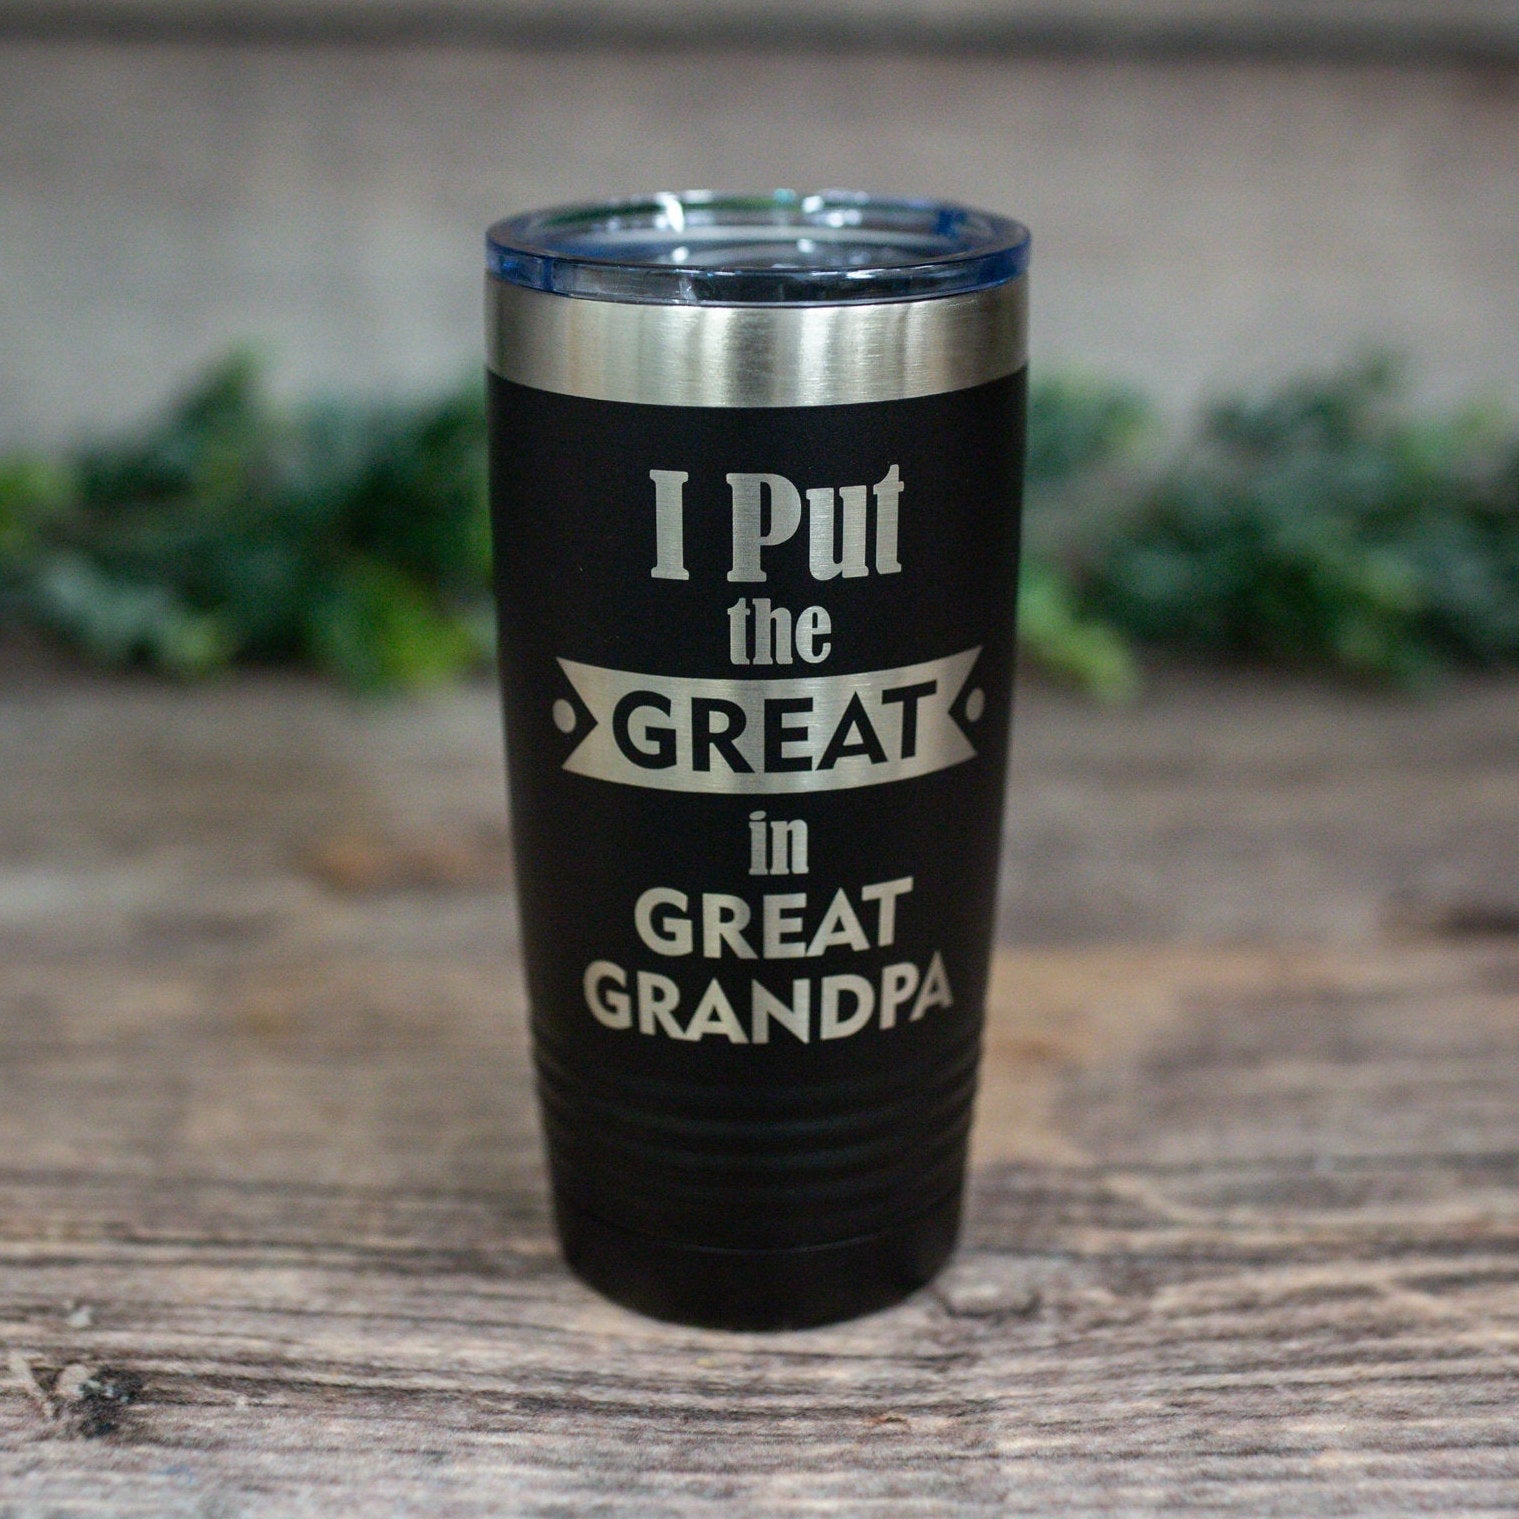 https://3cetching.com/wp-content/uploads/2021/07/i-put-the-great-in-great-grandpa-engraved-stainless-steel-tumbler-great-grandpa-mug-grandfather-gift-cup-60f7533c.jpg